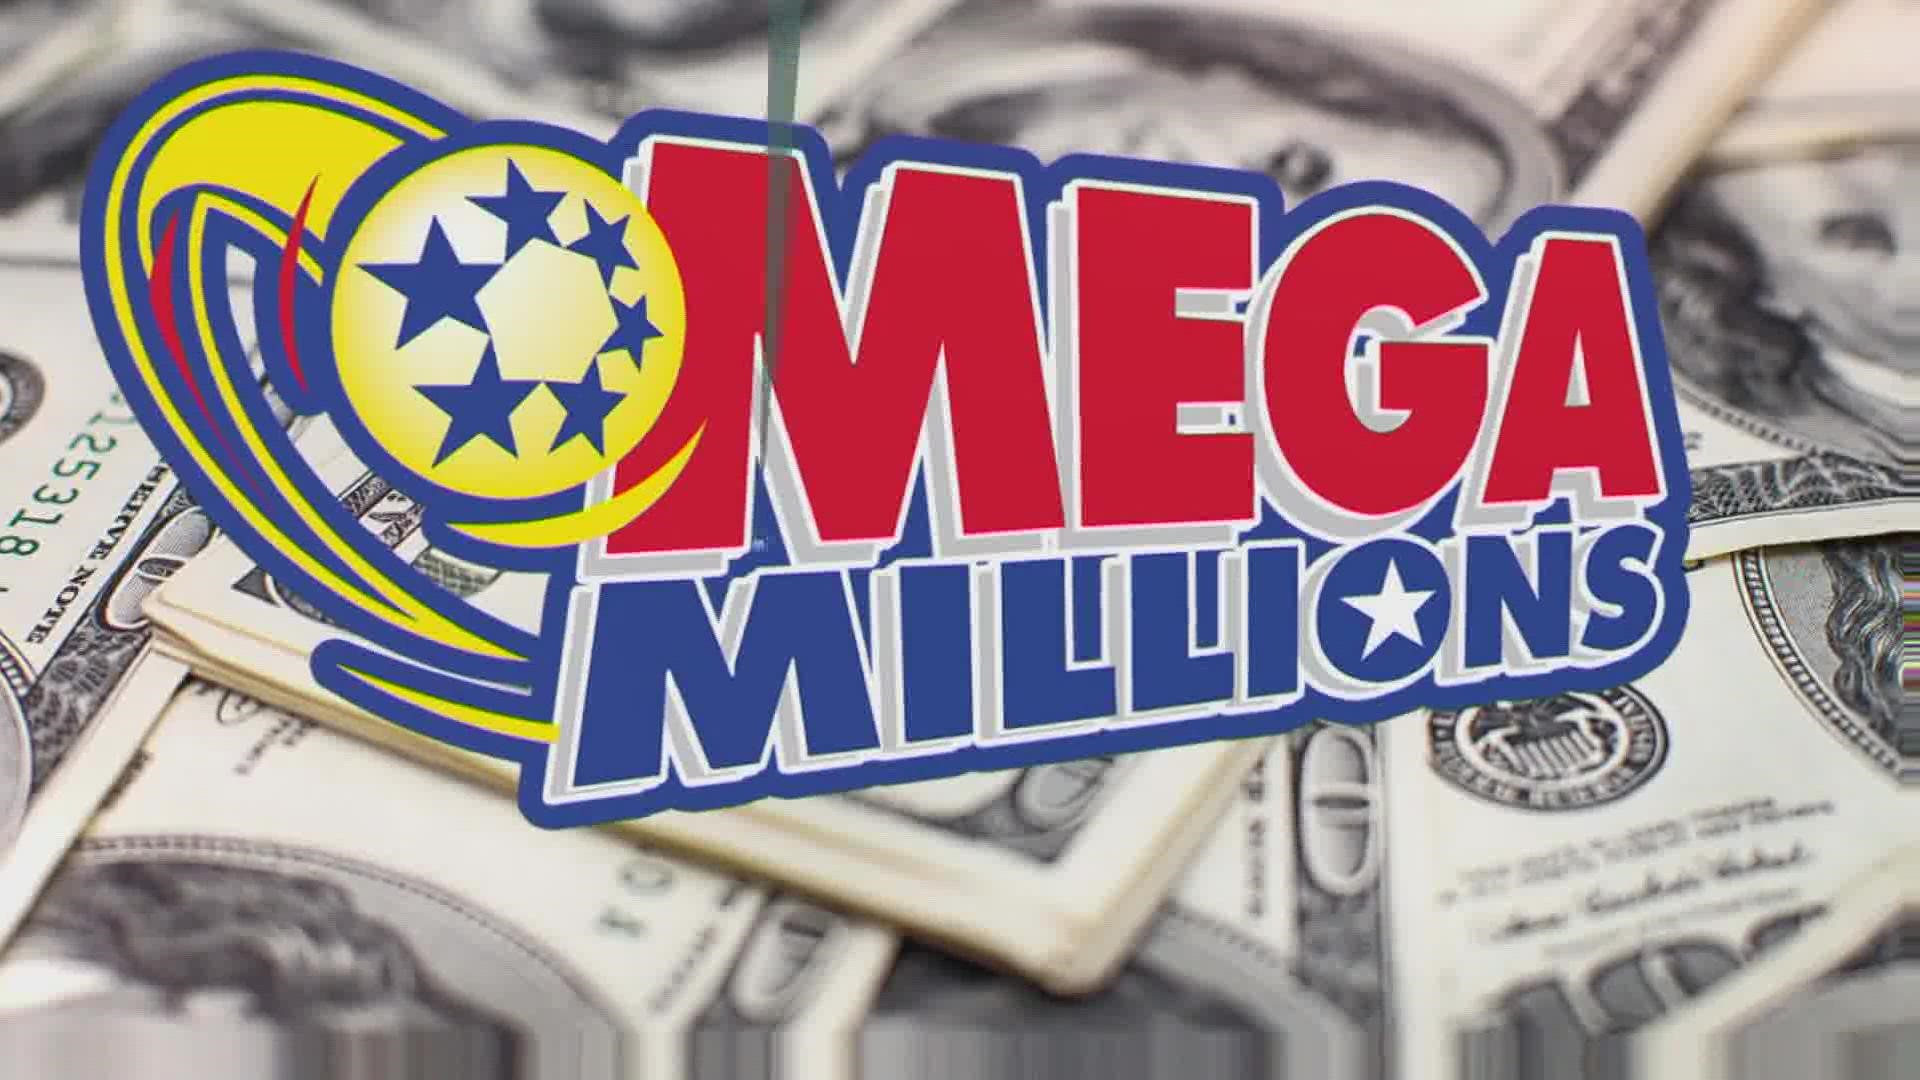 It's the sixth largest lottery jackpot in U.S. history.